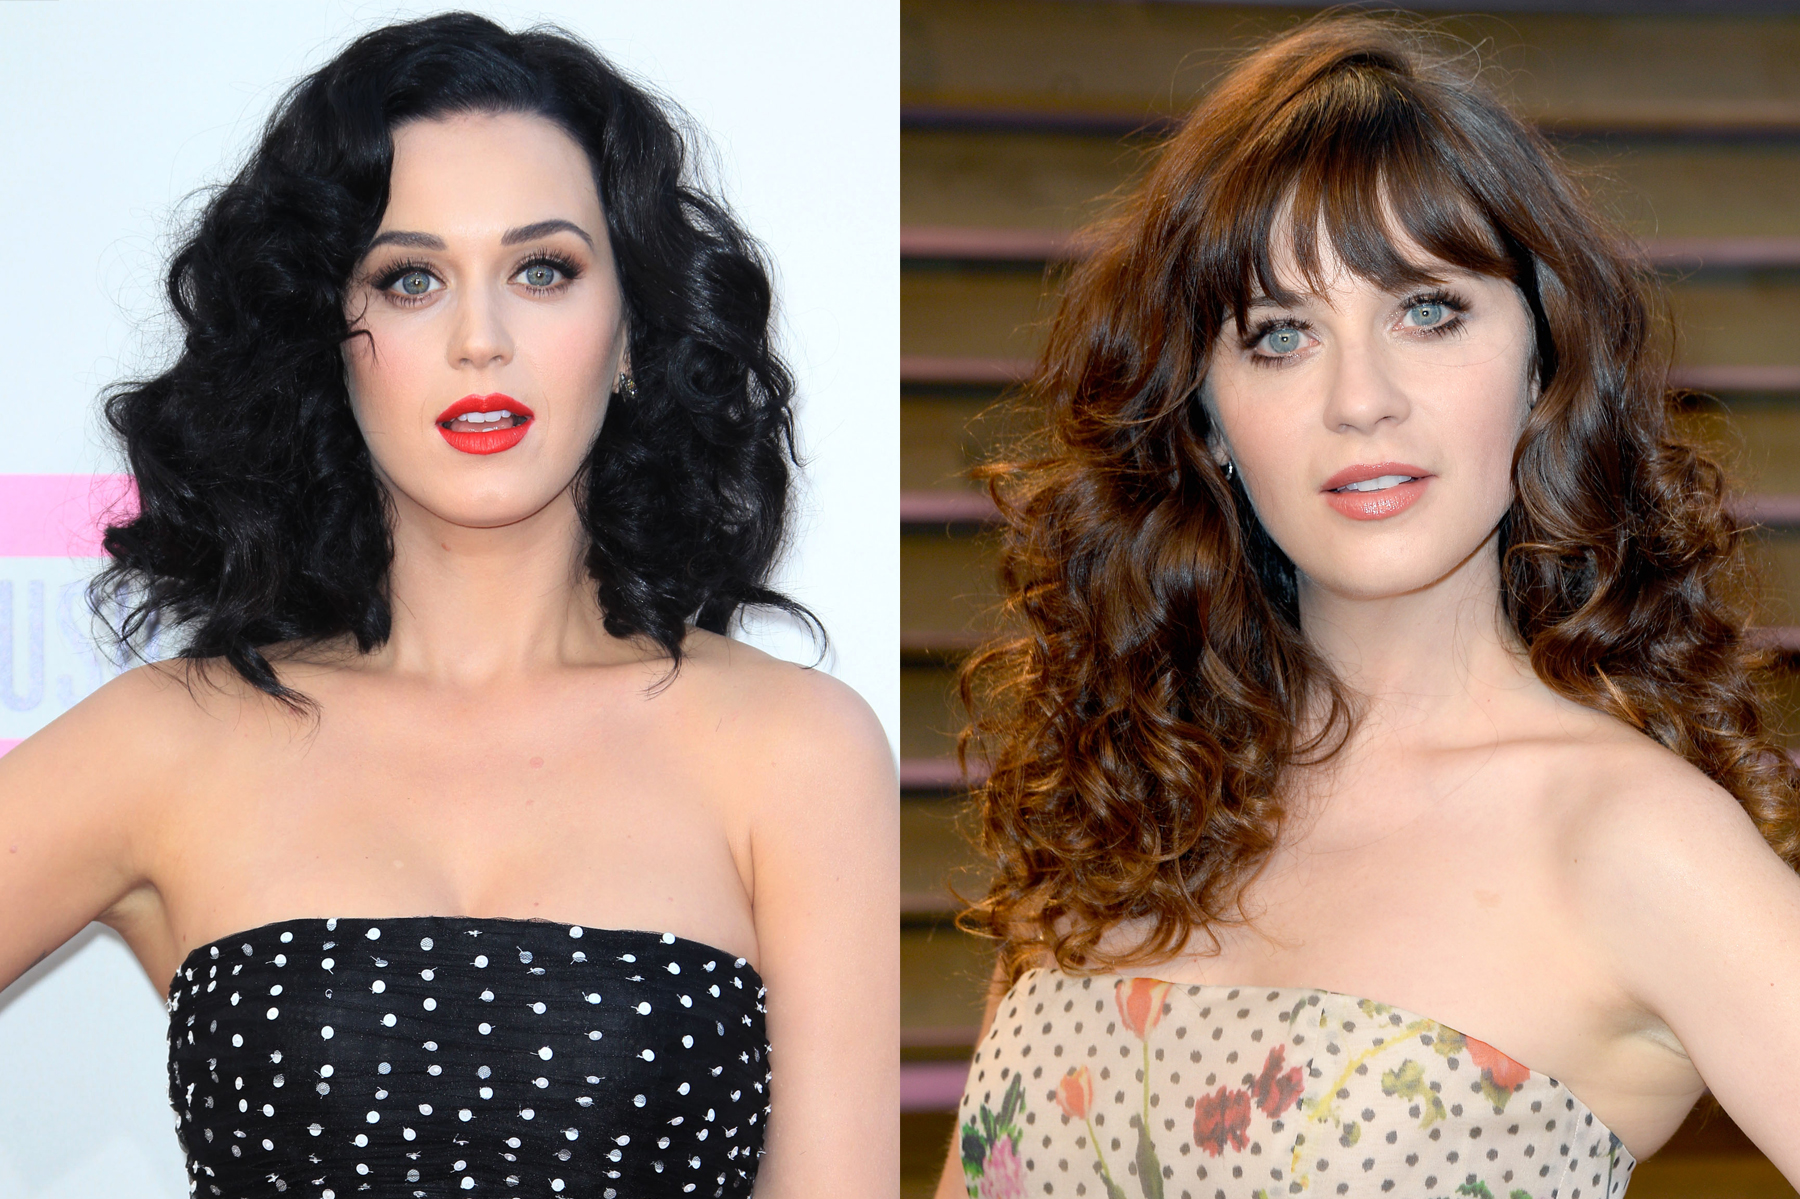 10 Adult Entertainment Stars Who Are Celebrity Doppelgängers